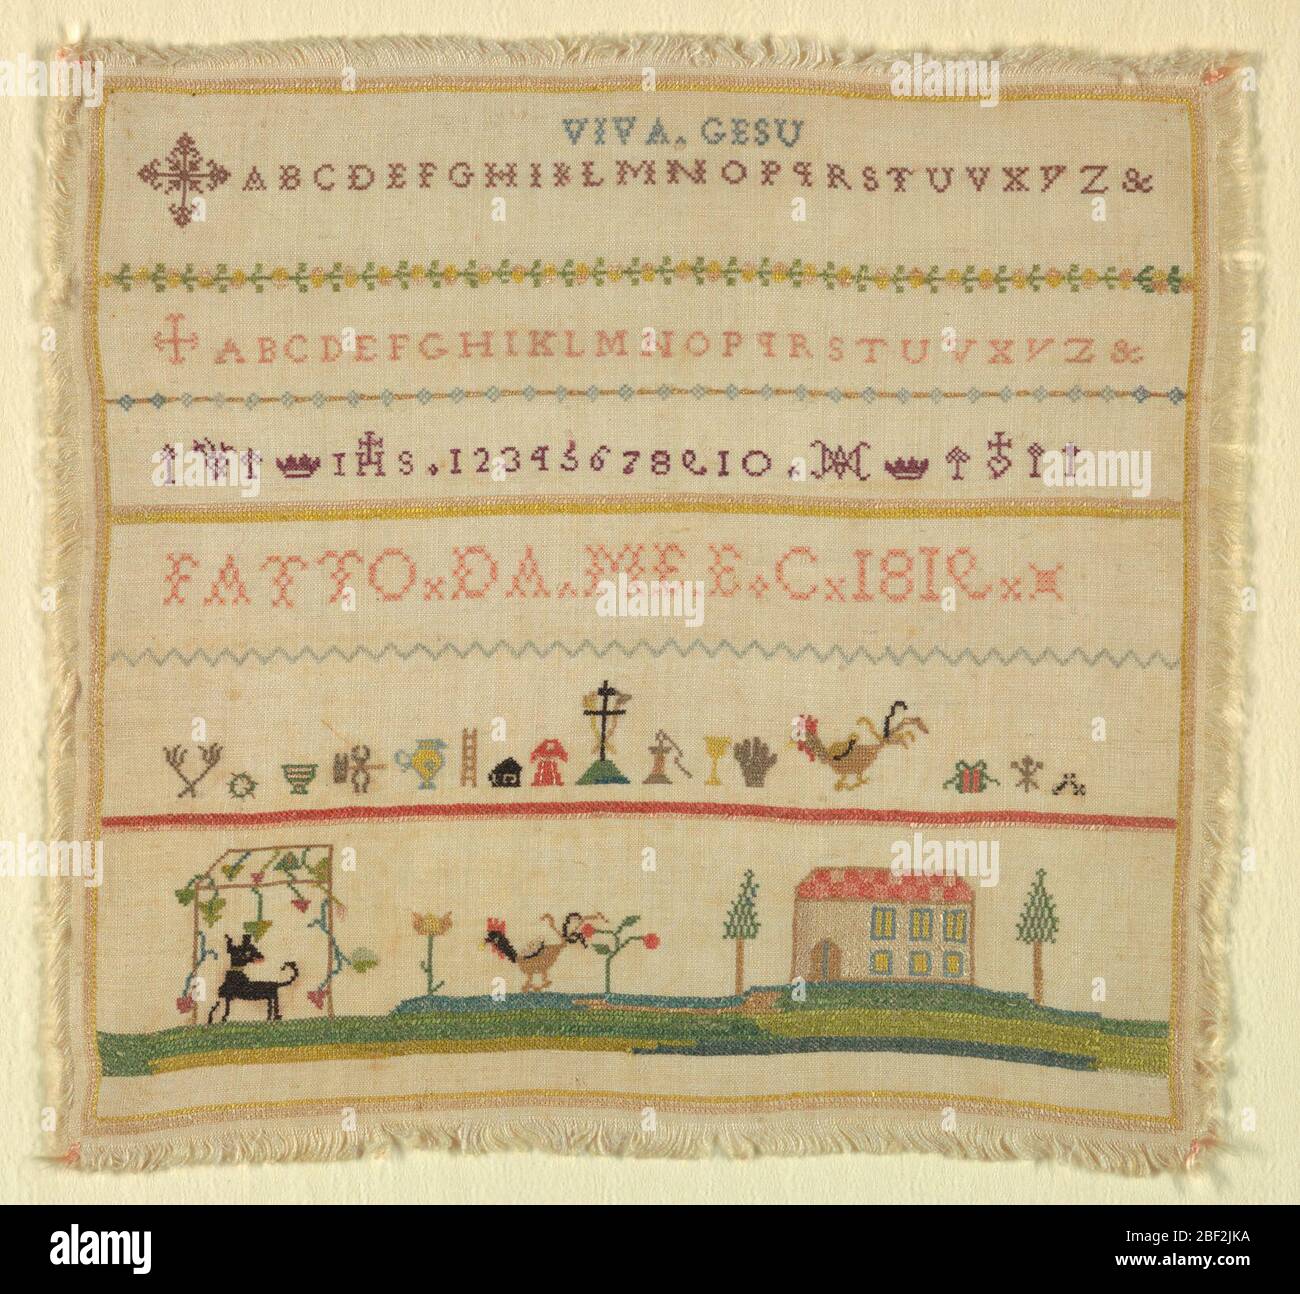 Sampler. Bands of two alphabets introduced by Maltese crosses, signature, symbols of the passion and landscape. Stock Photo